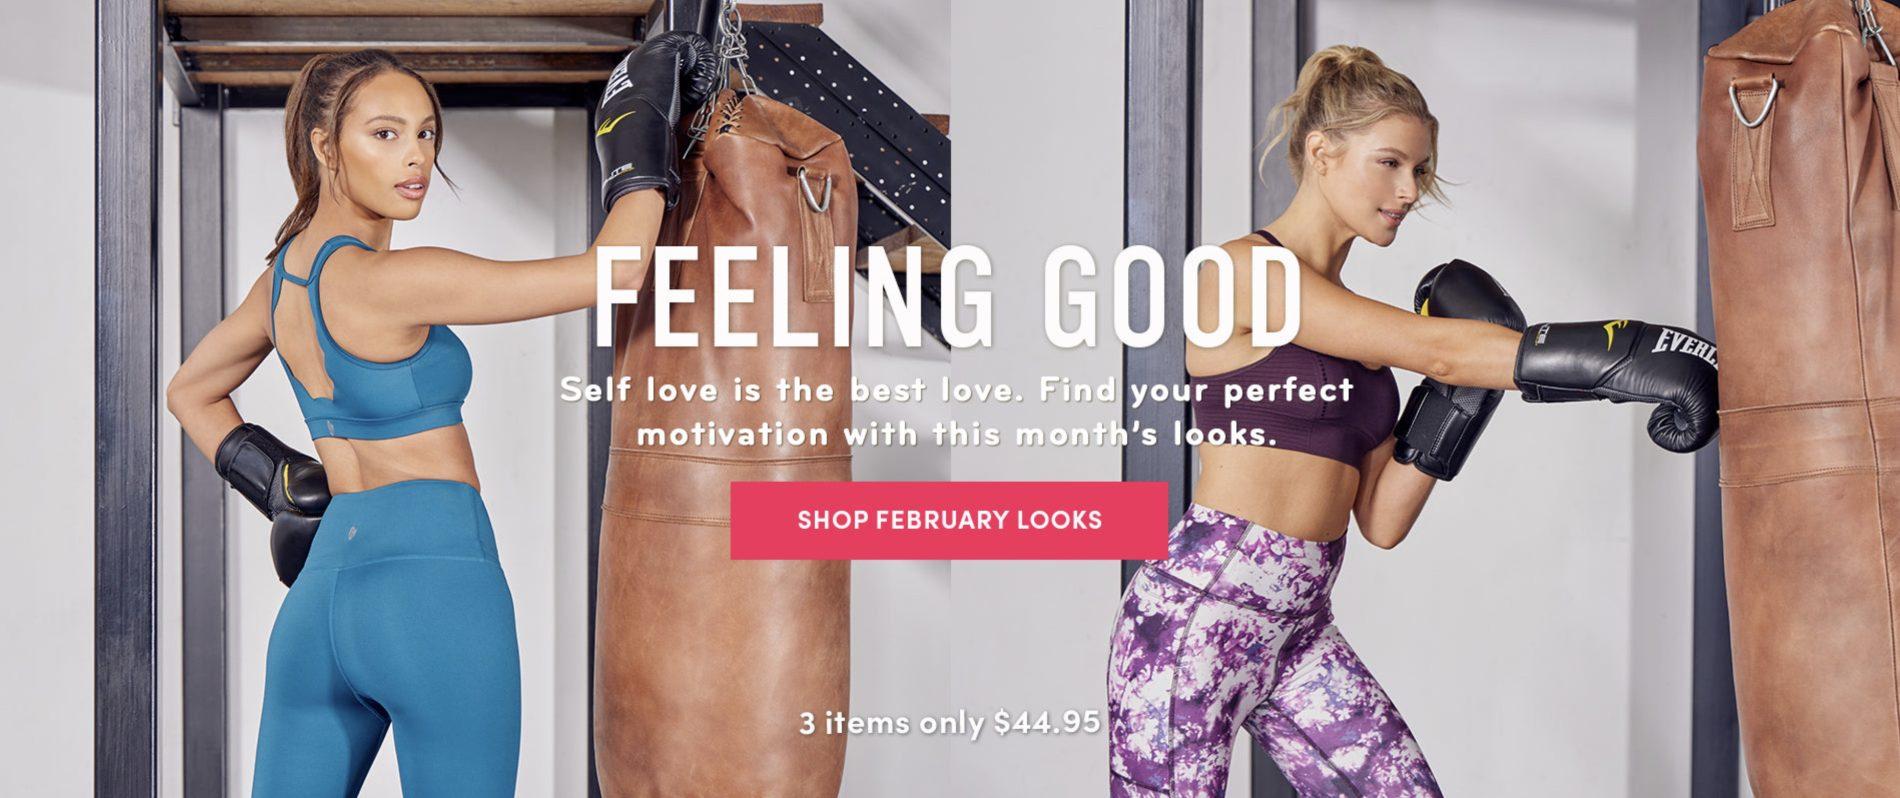 Ellie Women’s Fitness Subscription Box – February 2022 Reveal + Coupon Code!